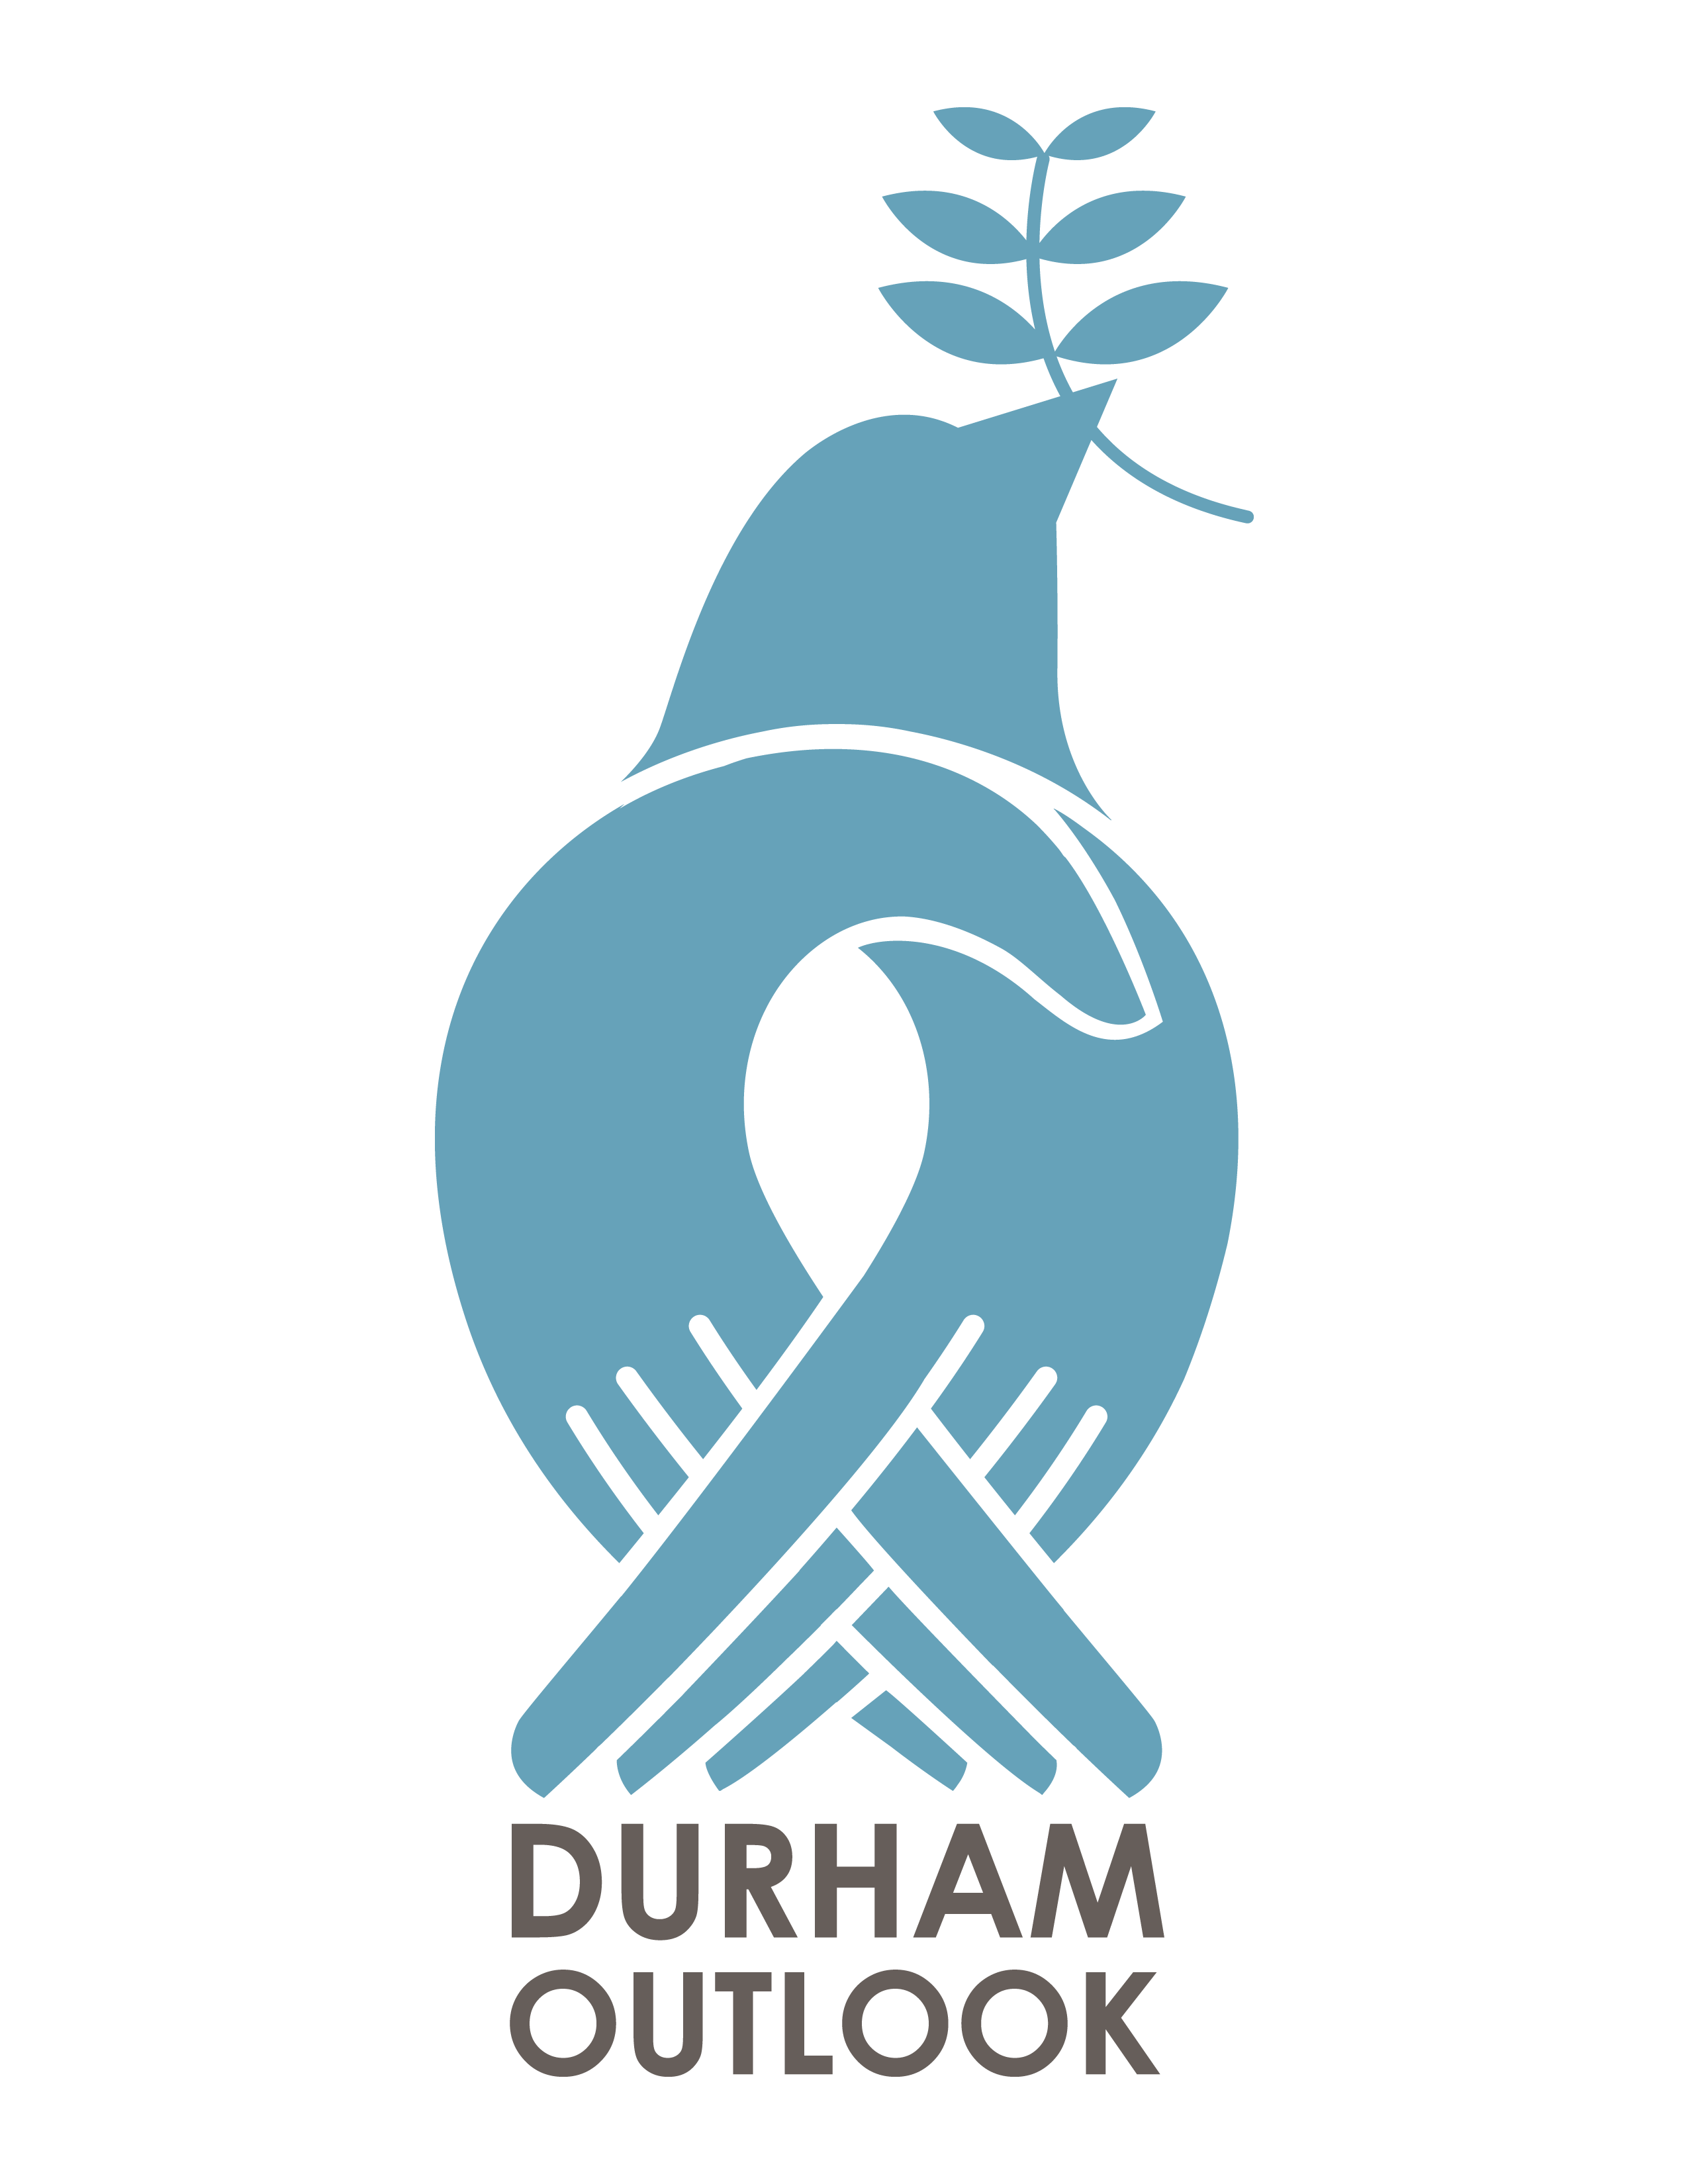 Durham Outlook for the Needy